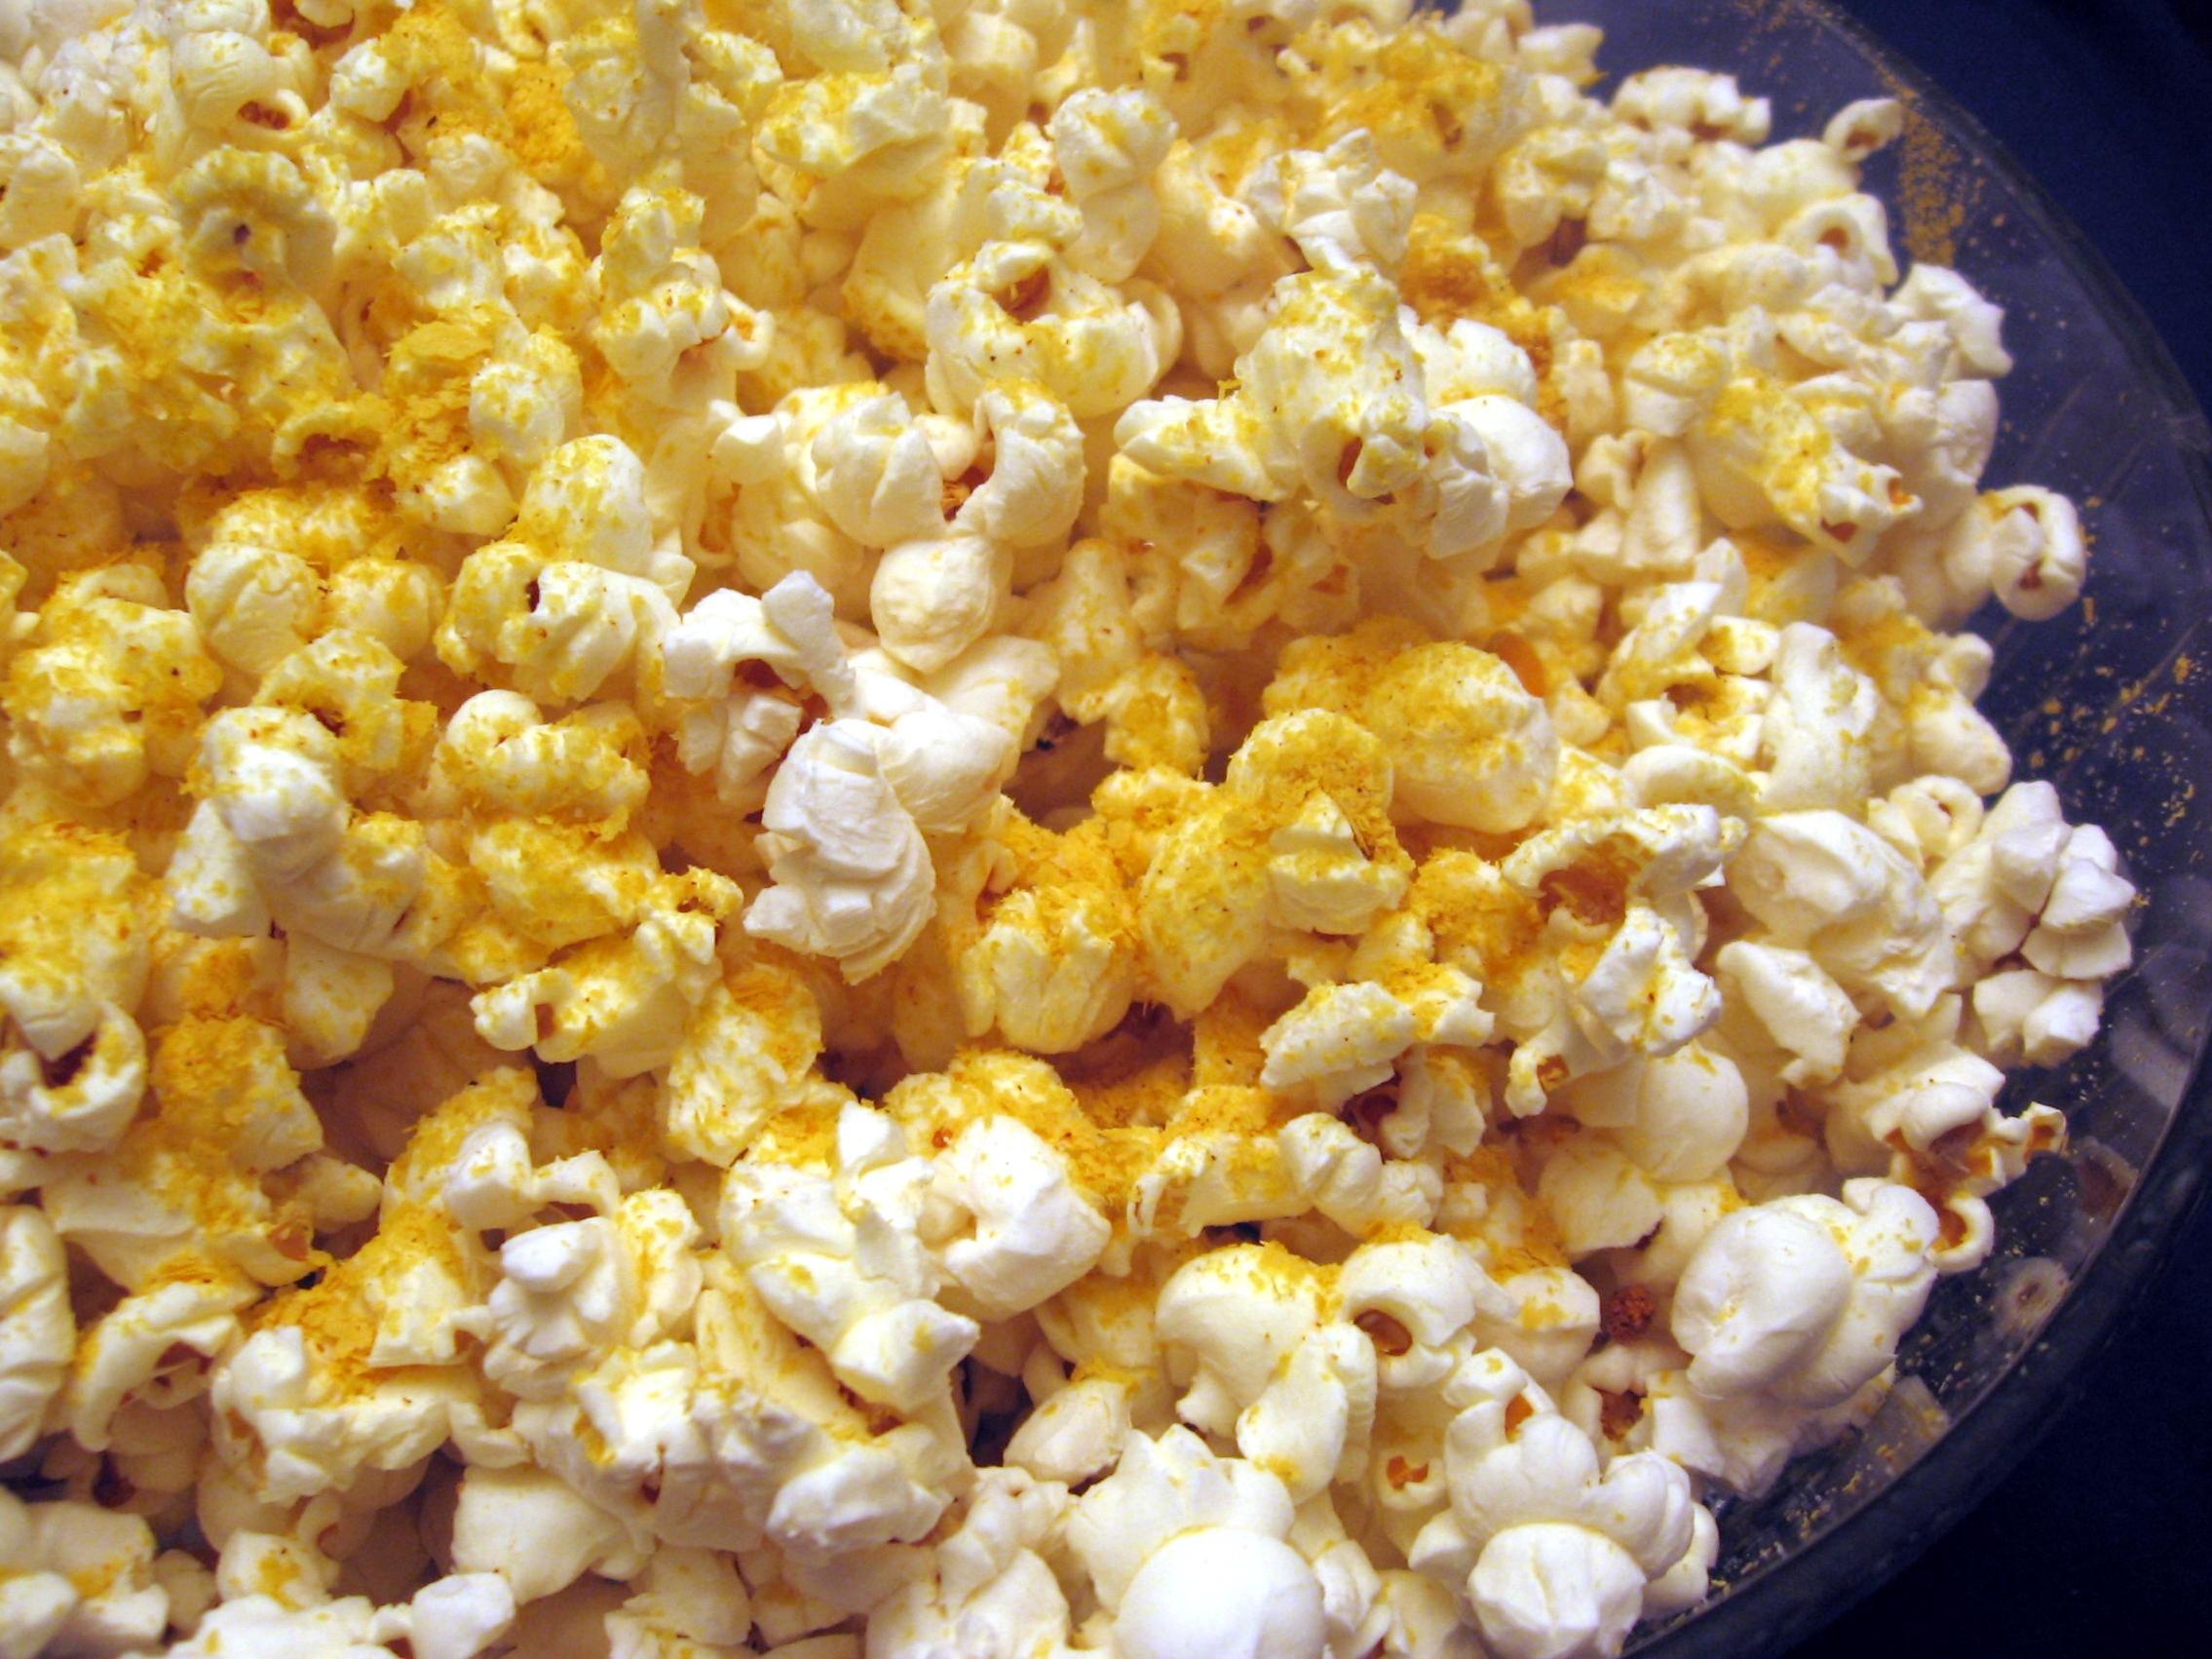  Get ready for a deliciously cheesy movie night with this vegan Cheezy Popcorn recipe!